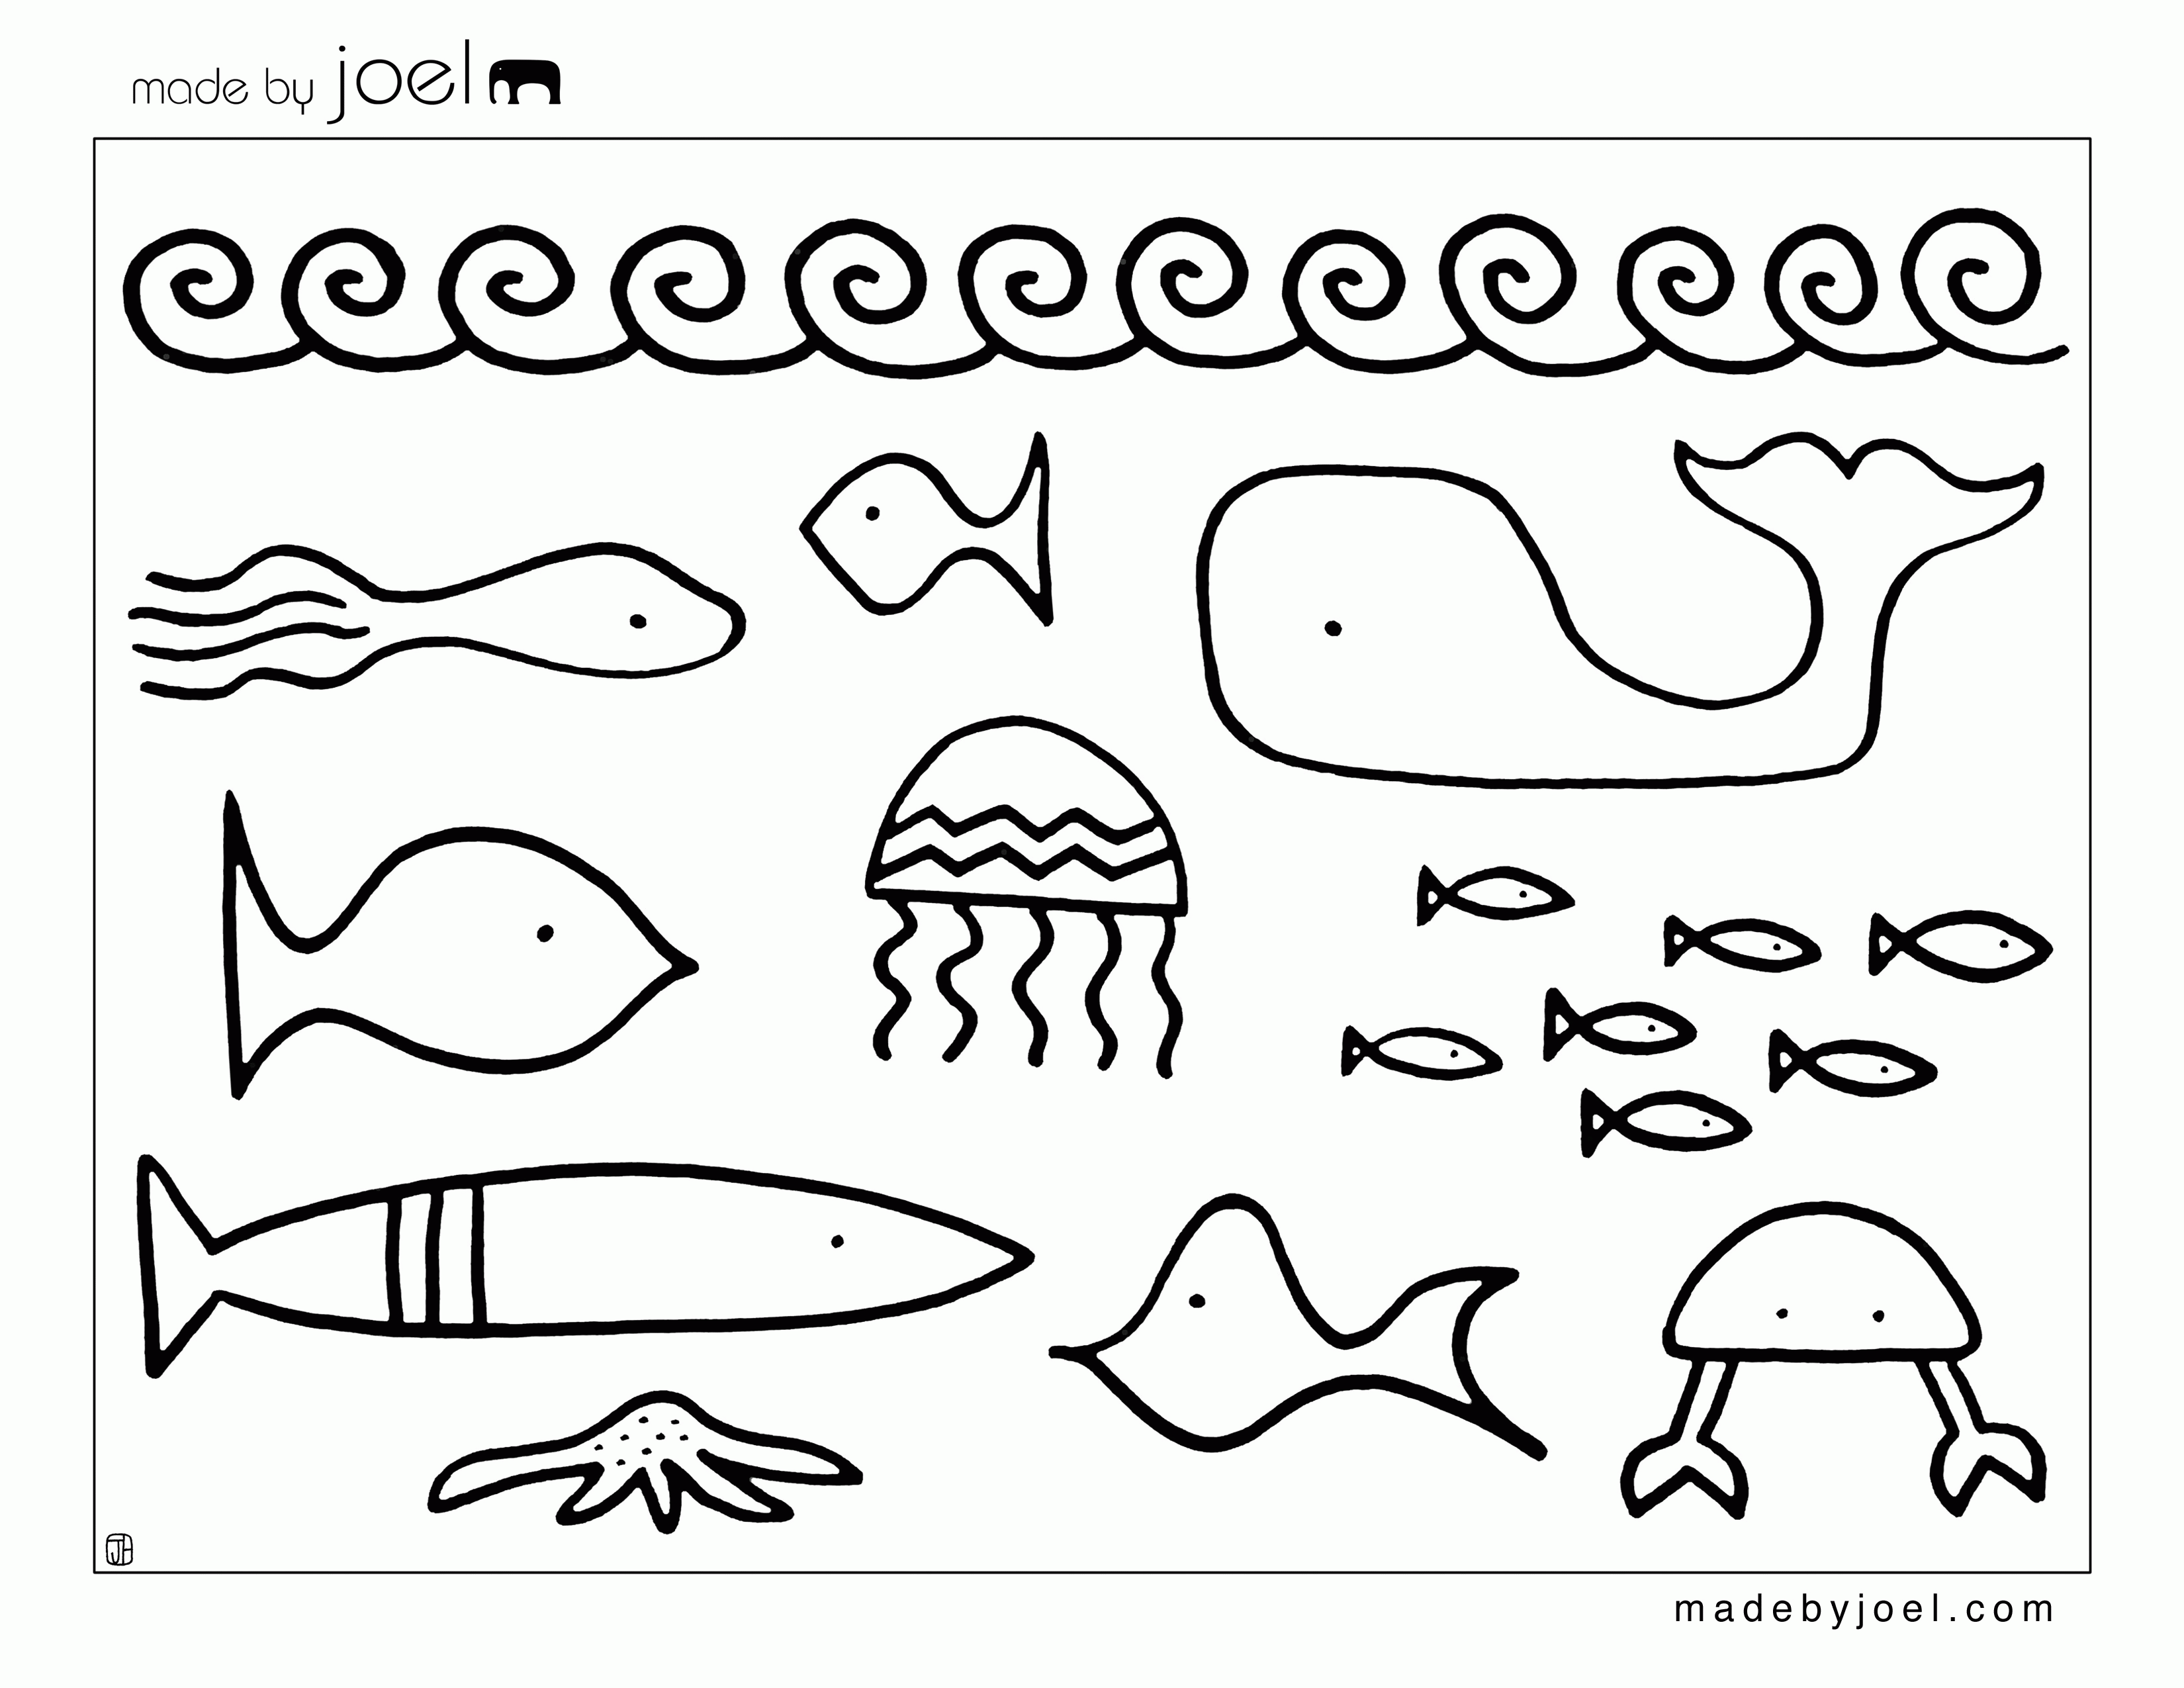 Made by Joel Â» Blackfish Cafe Coloring Sheets